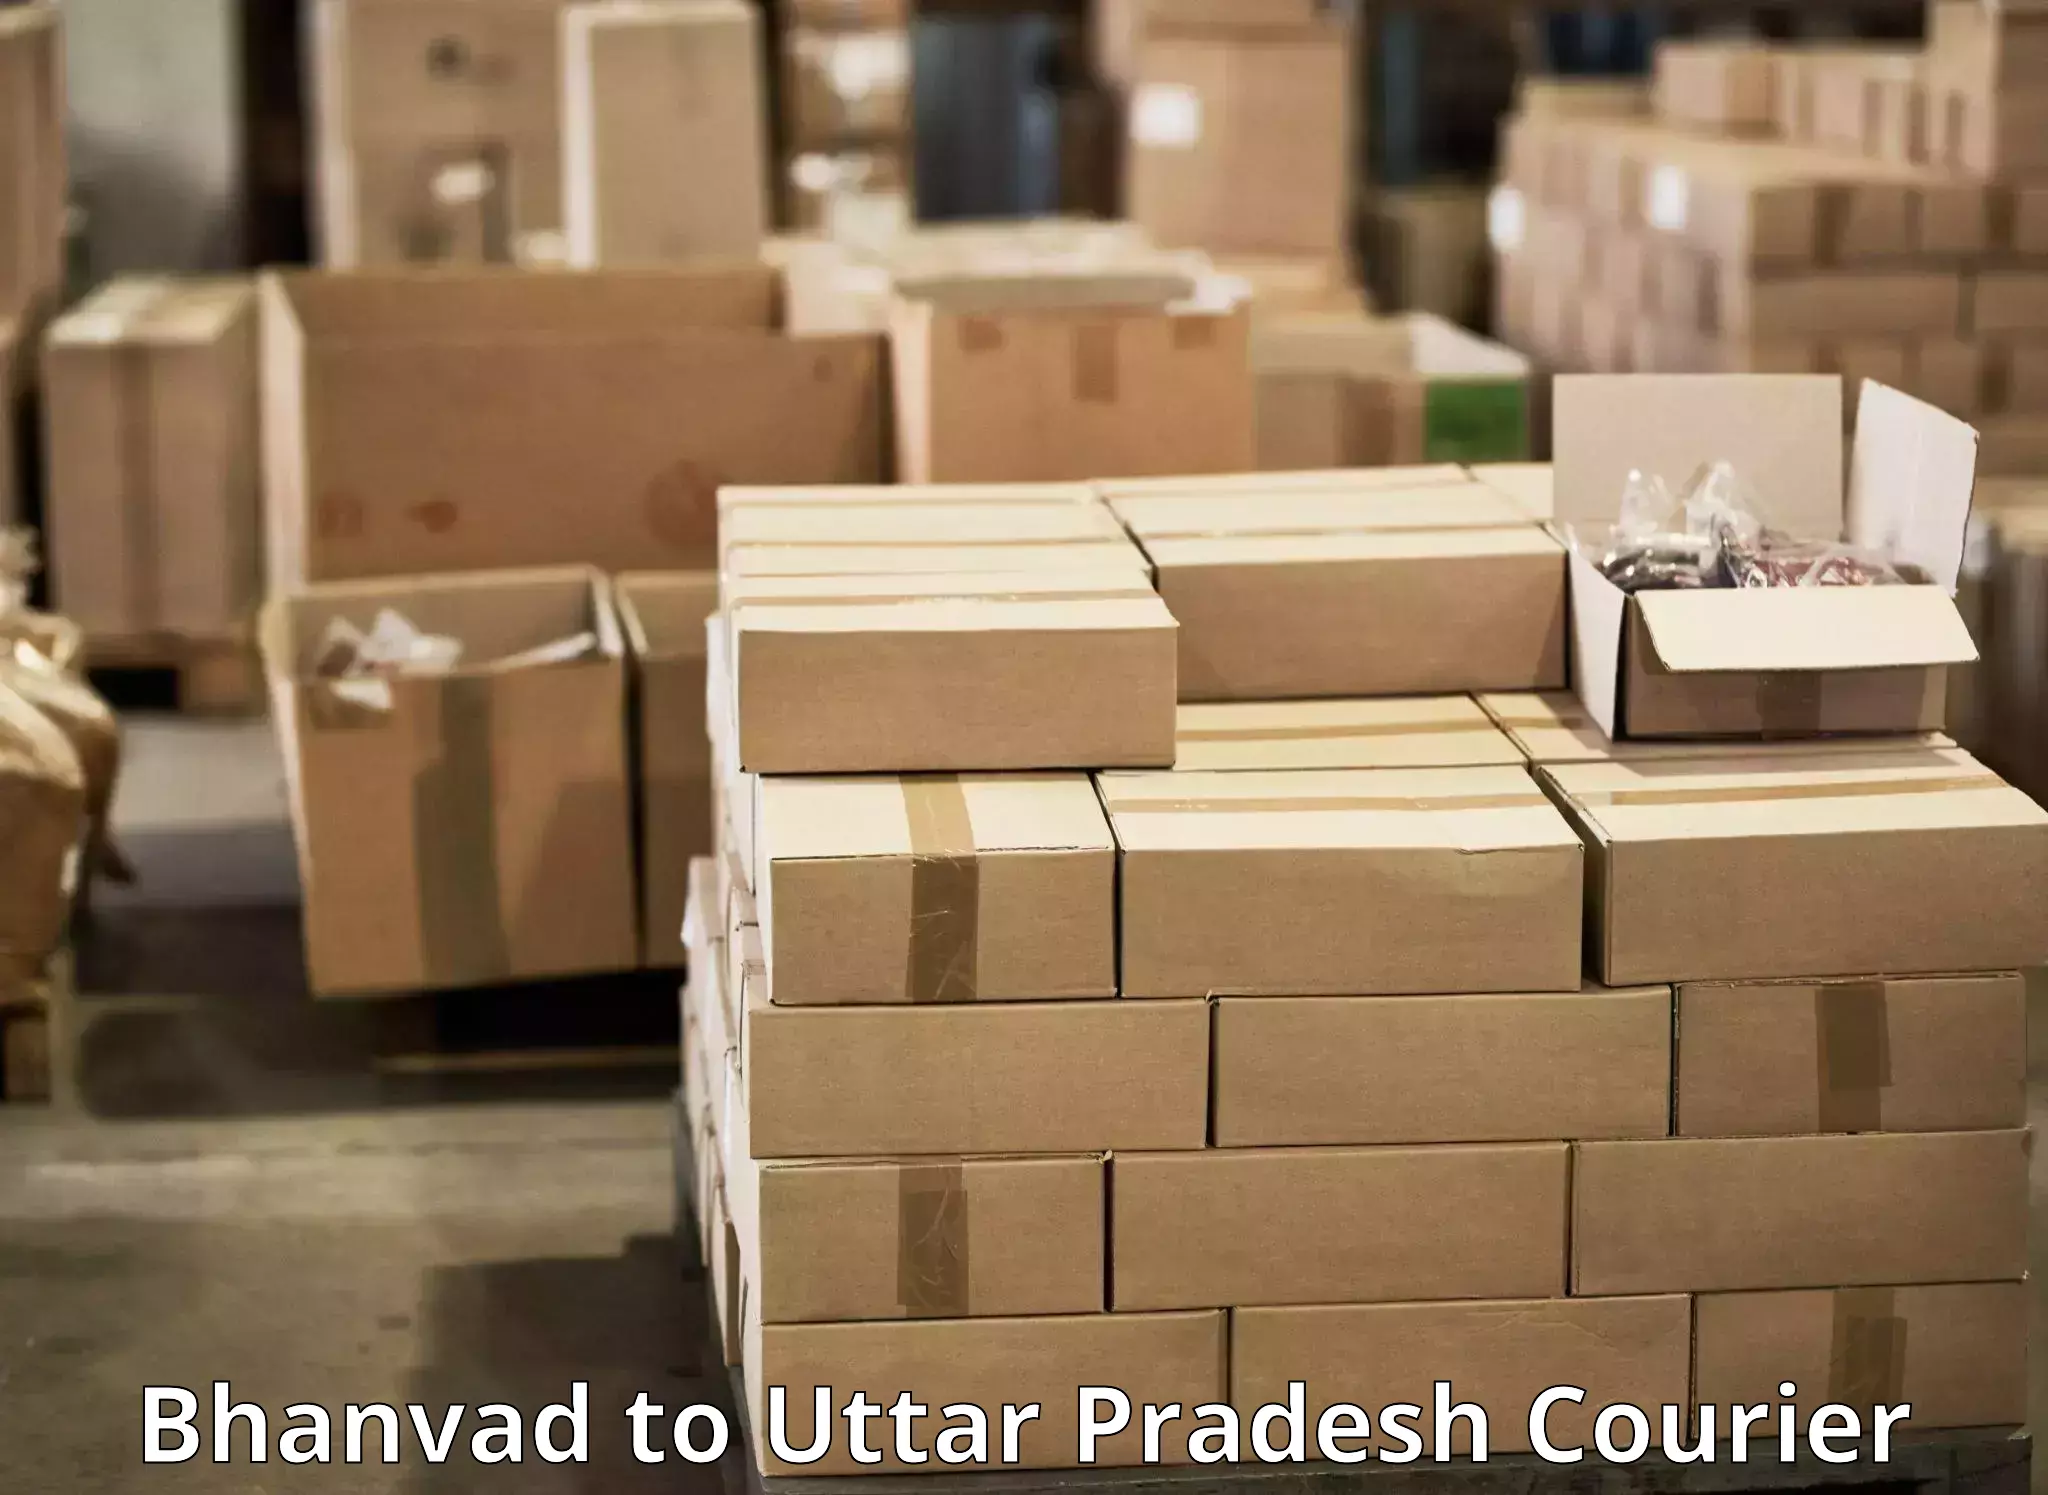 Bulk courier orders Bhanvad to Bareilly